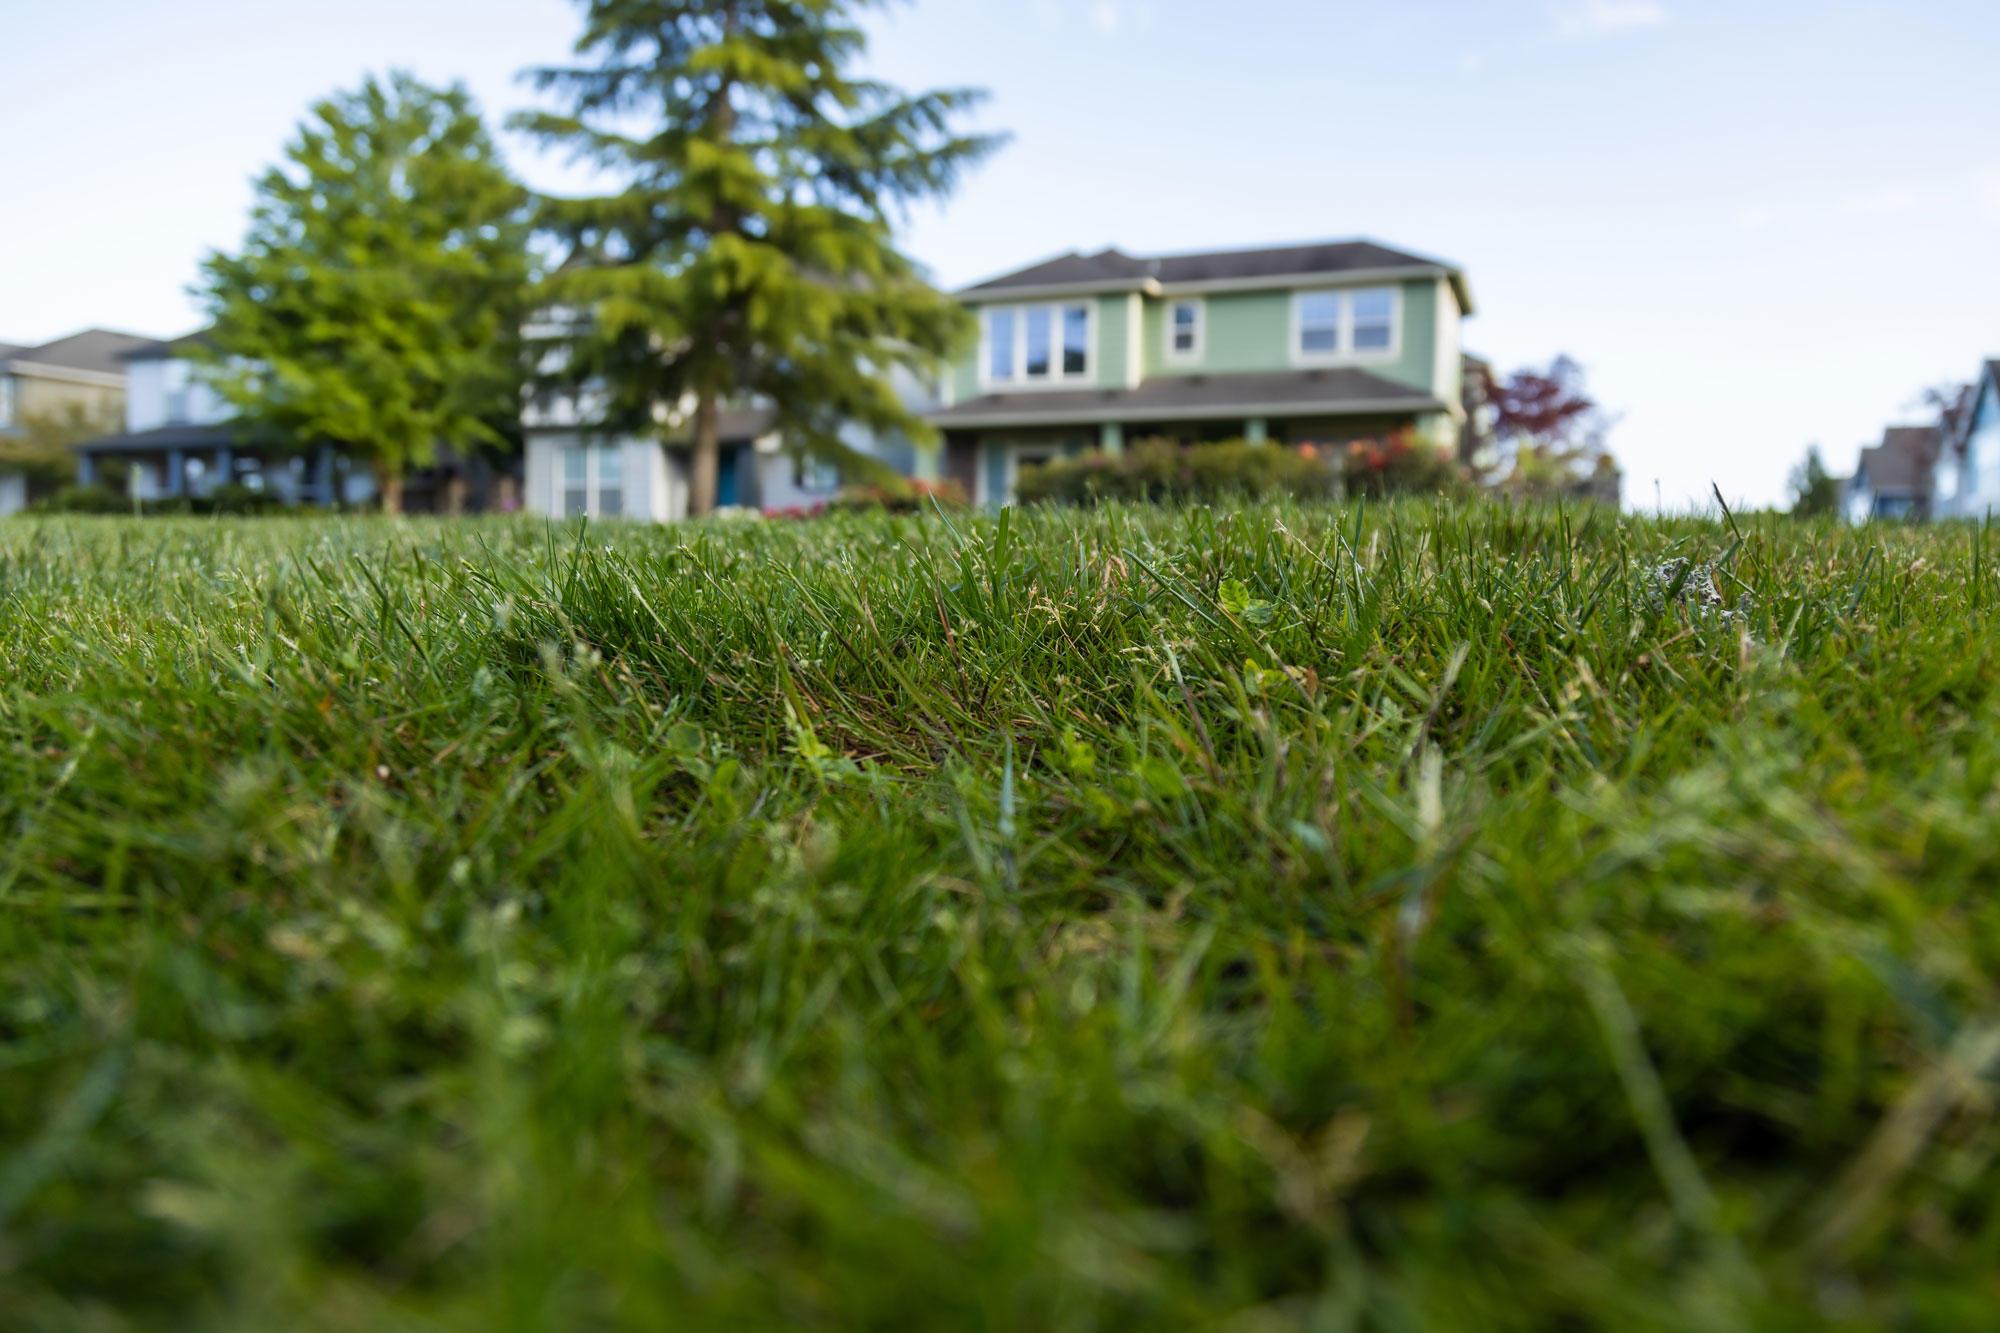 If you let your lawn go dormant in the summer, August is a good time to get your lawn back into shape.